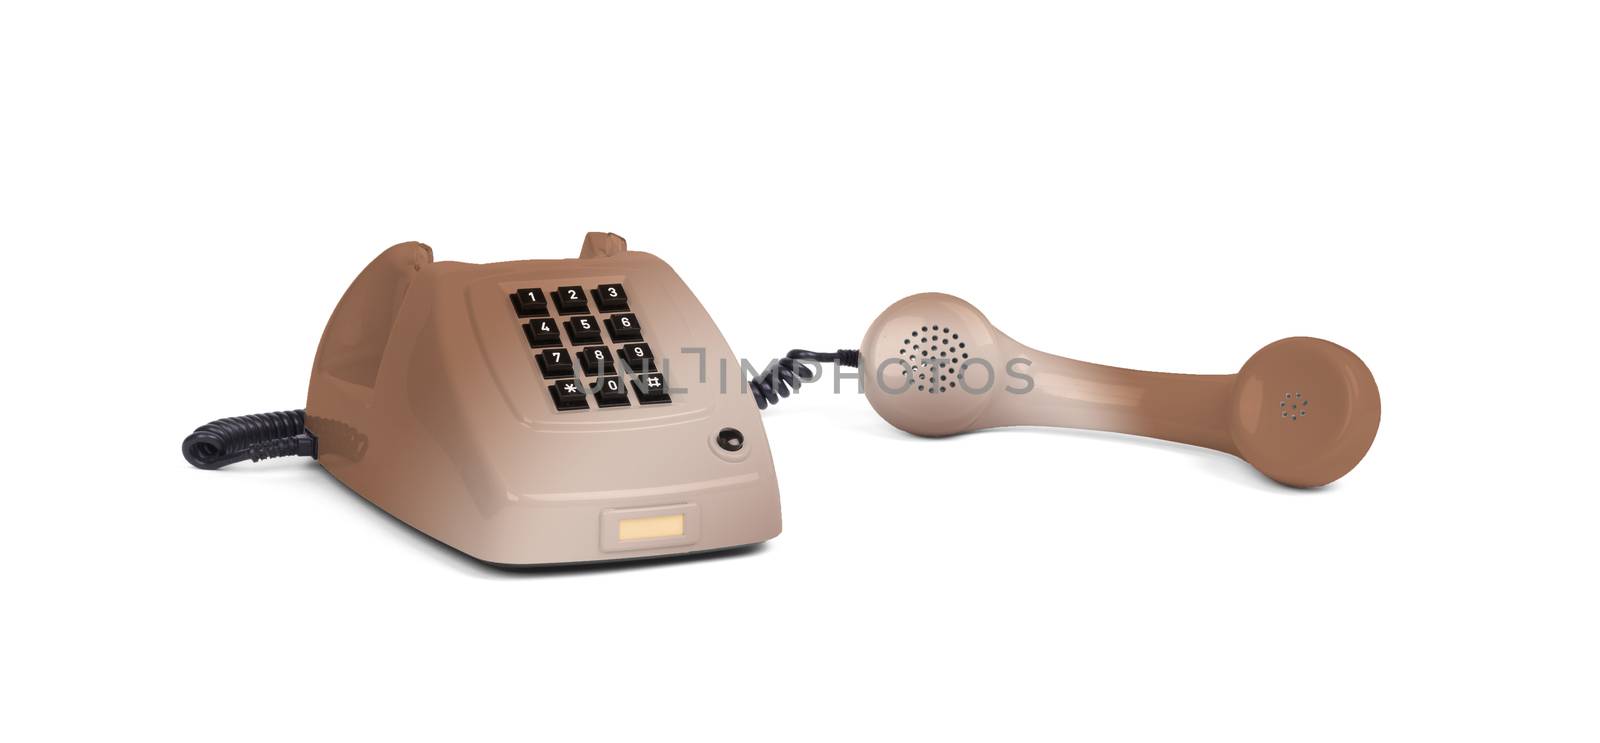 Vintage brown telephone with a white background